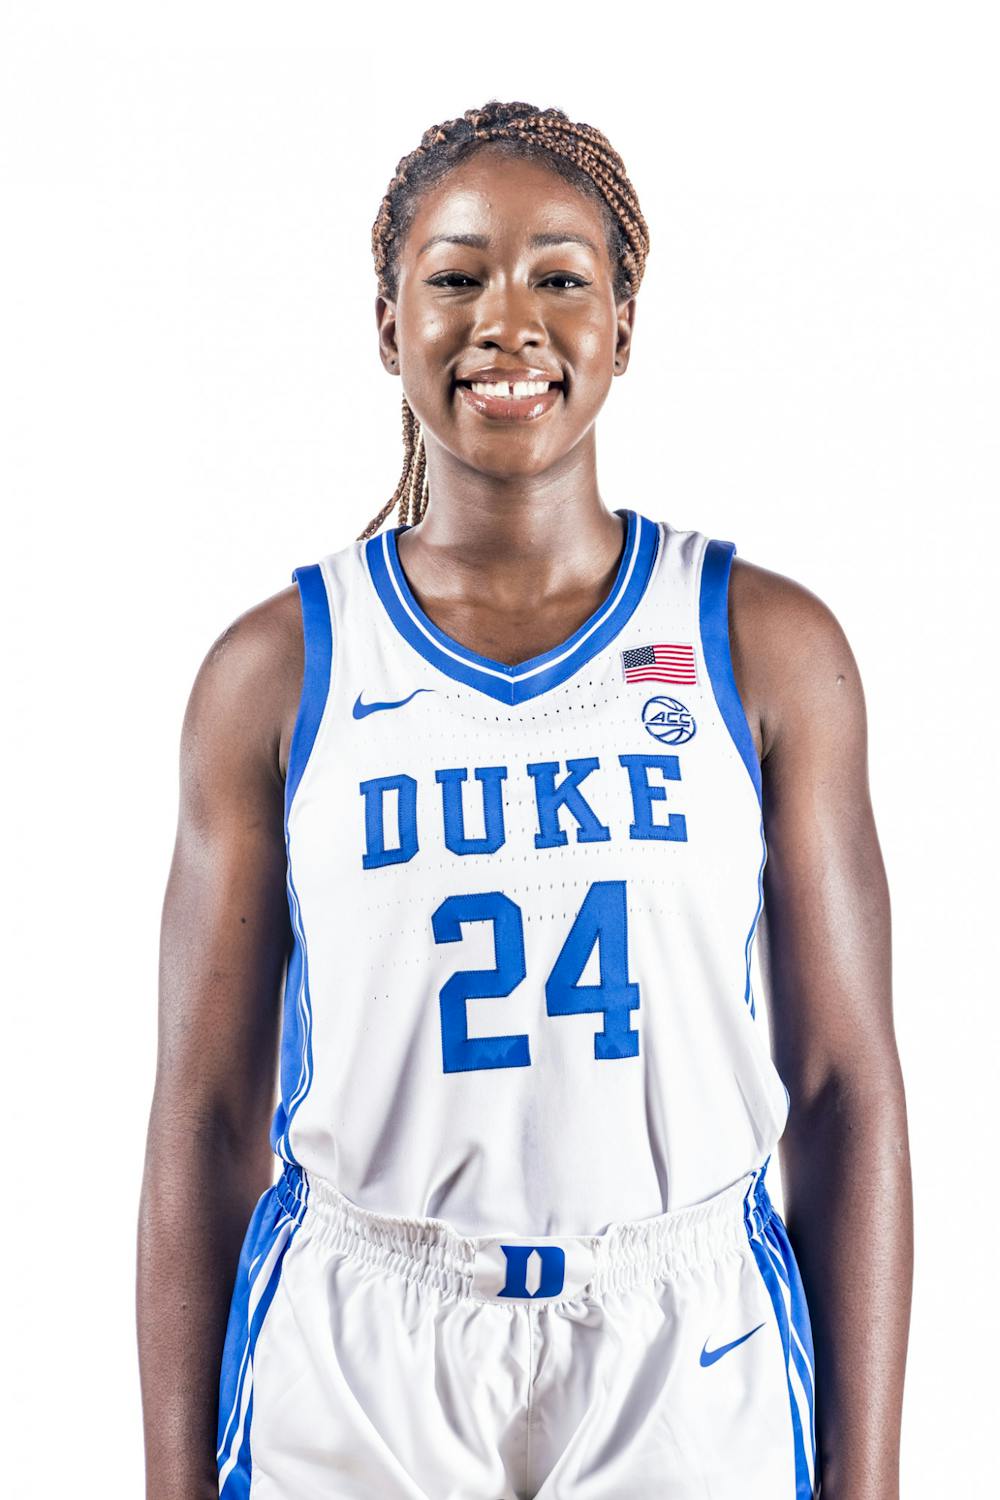 In her fourth year with the program, Akinbode-James will add depth to the Blue Devils' frontcourt.